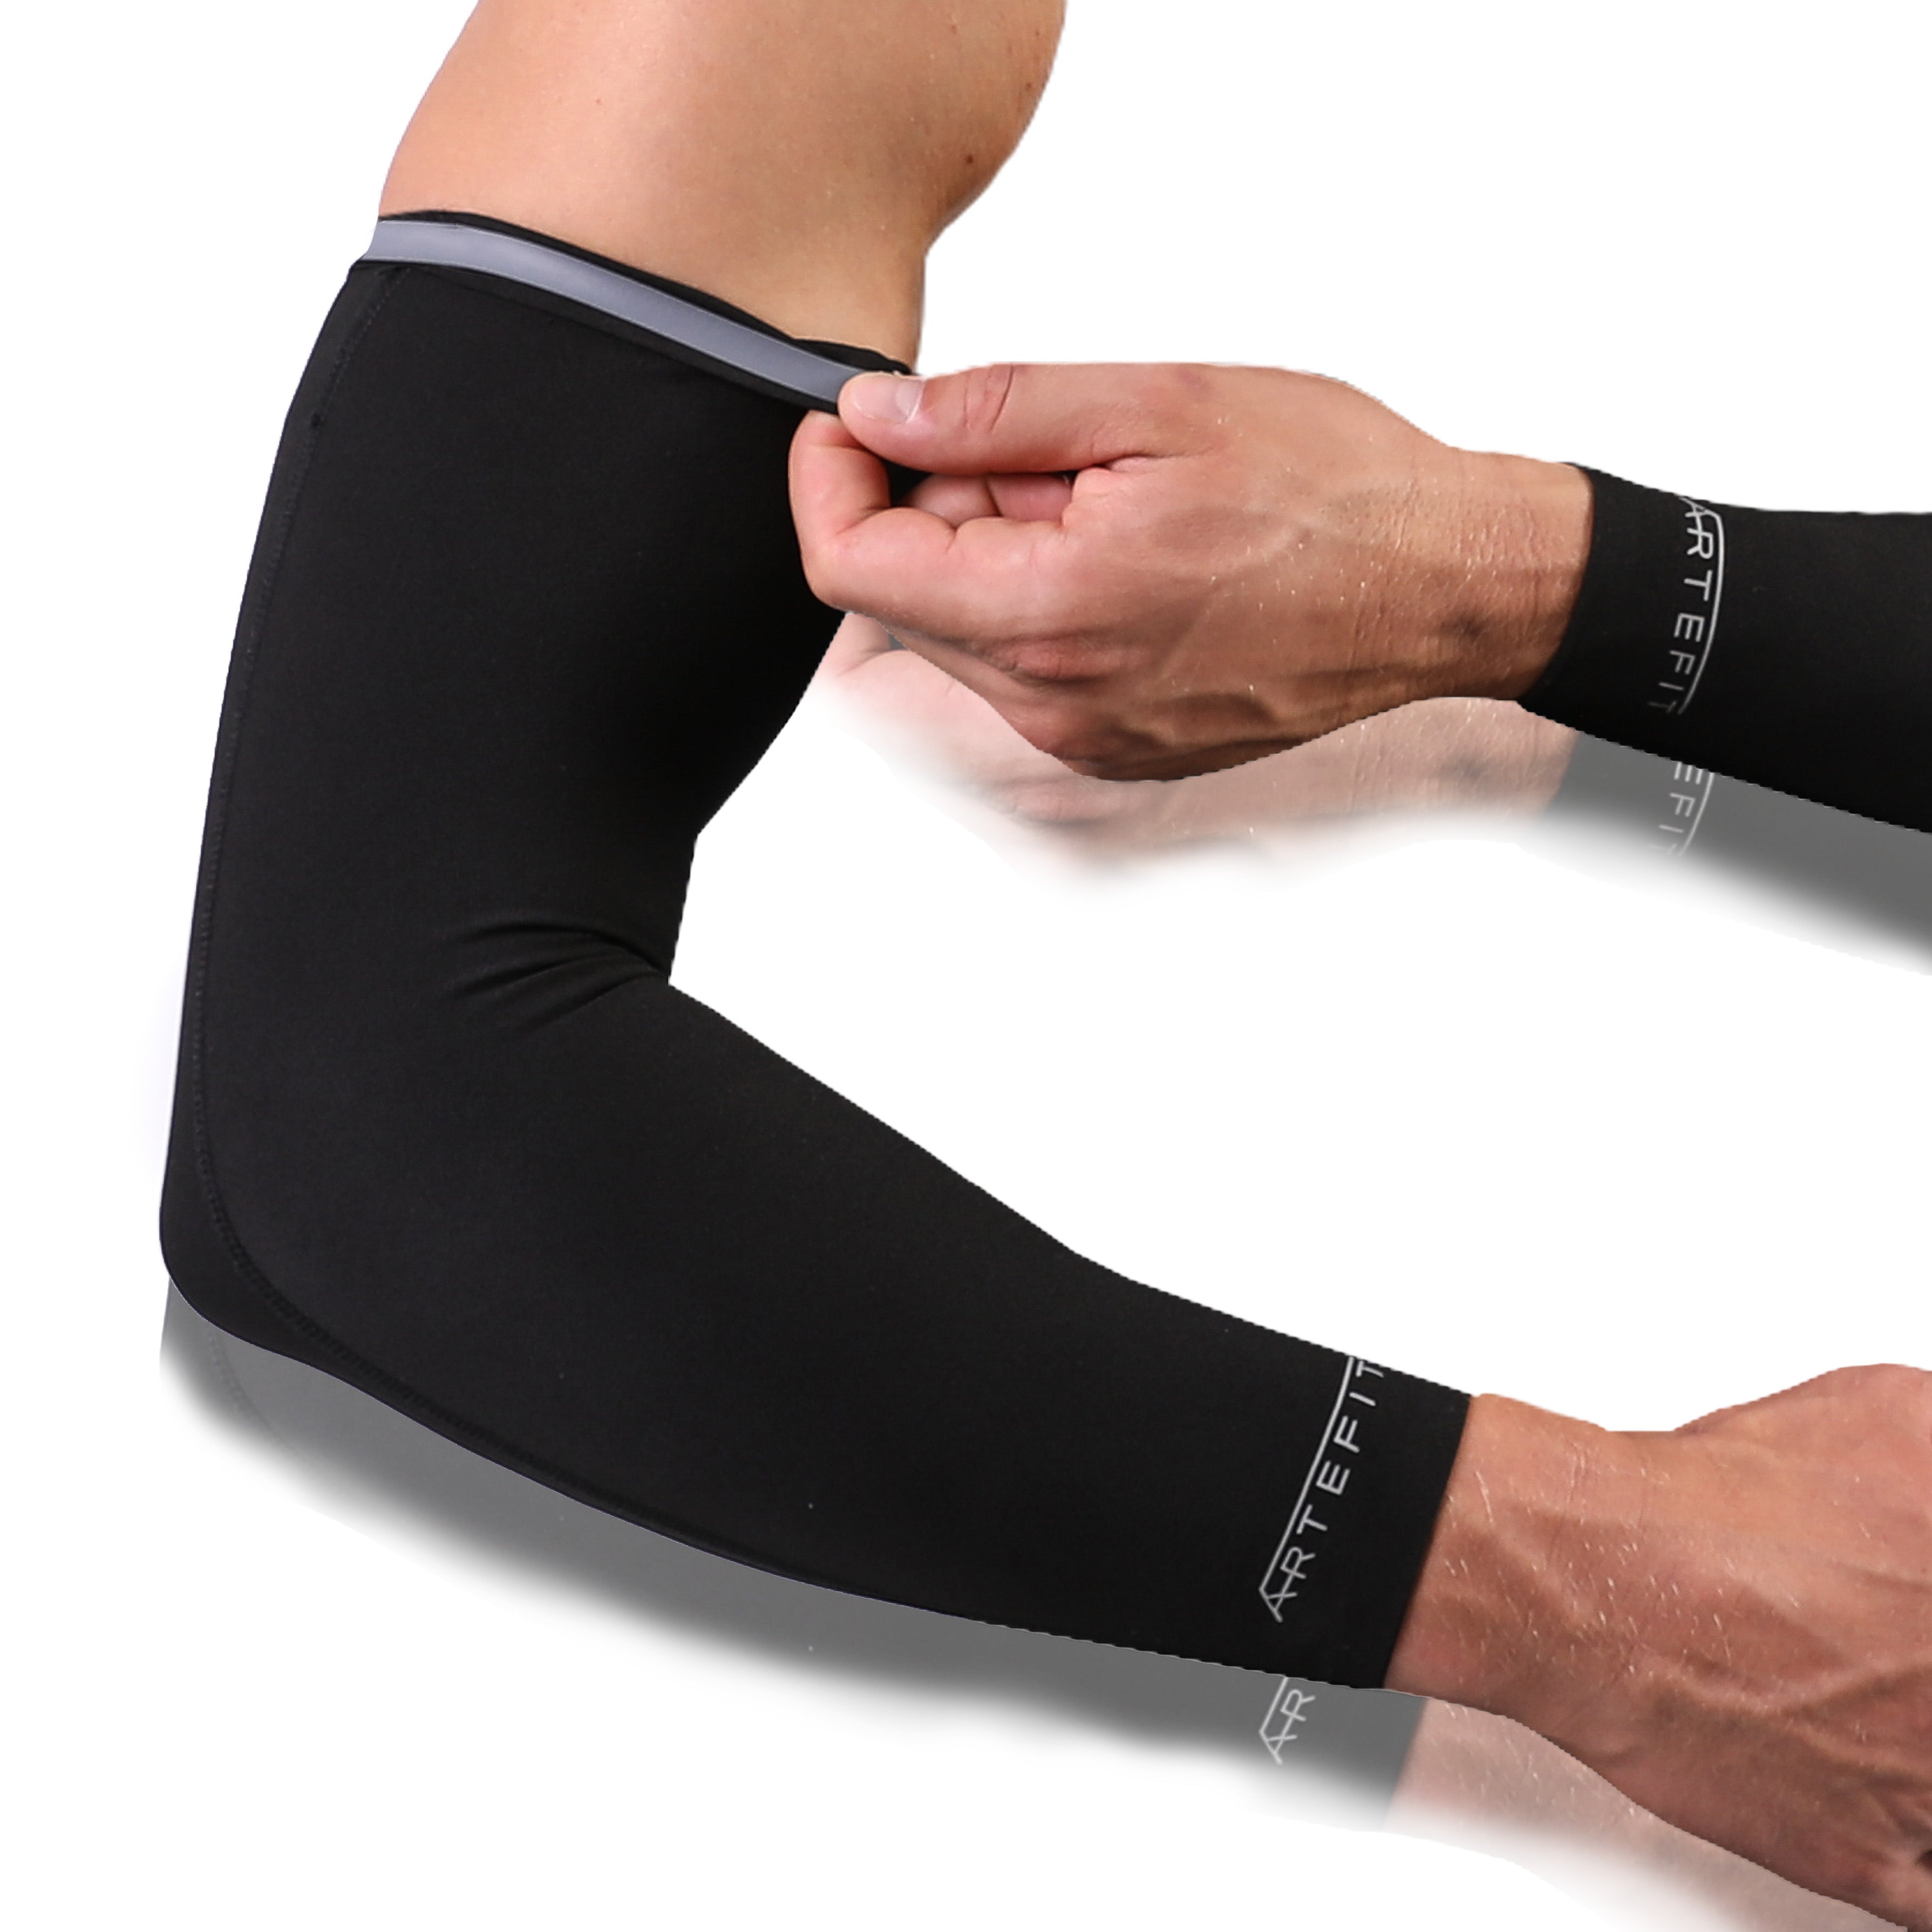  Artefit Forearm Sleeves - Compressions Short Arm Sleeves - UV  Protection (Black, S) : Health & Household